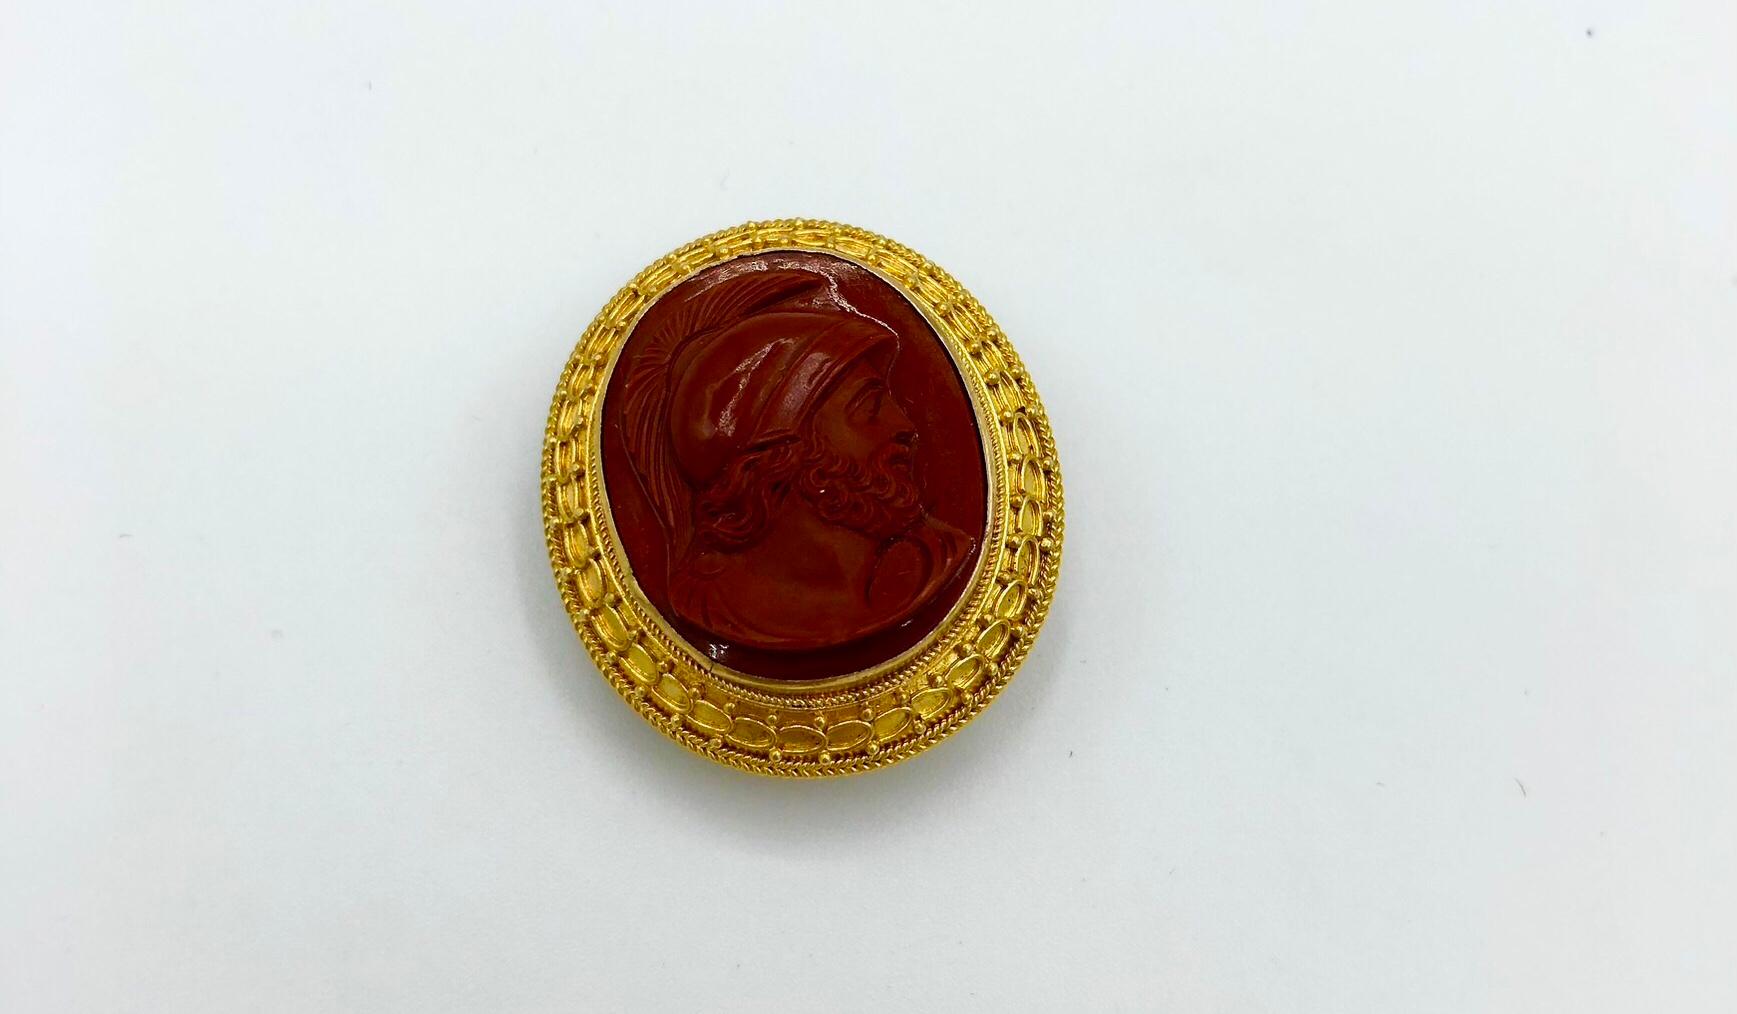 Western Europe, Neoclassical, ca. 19th to early 20th century CE wearable cufflinks. This is a handsome and wearable pair of paste glass cameos set into a high quality 74% to 88.5% gold (equivalent to 17K+ to 21K+) settings.

The cameos are set in